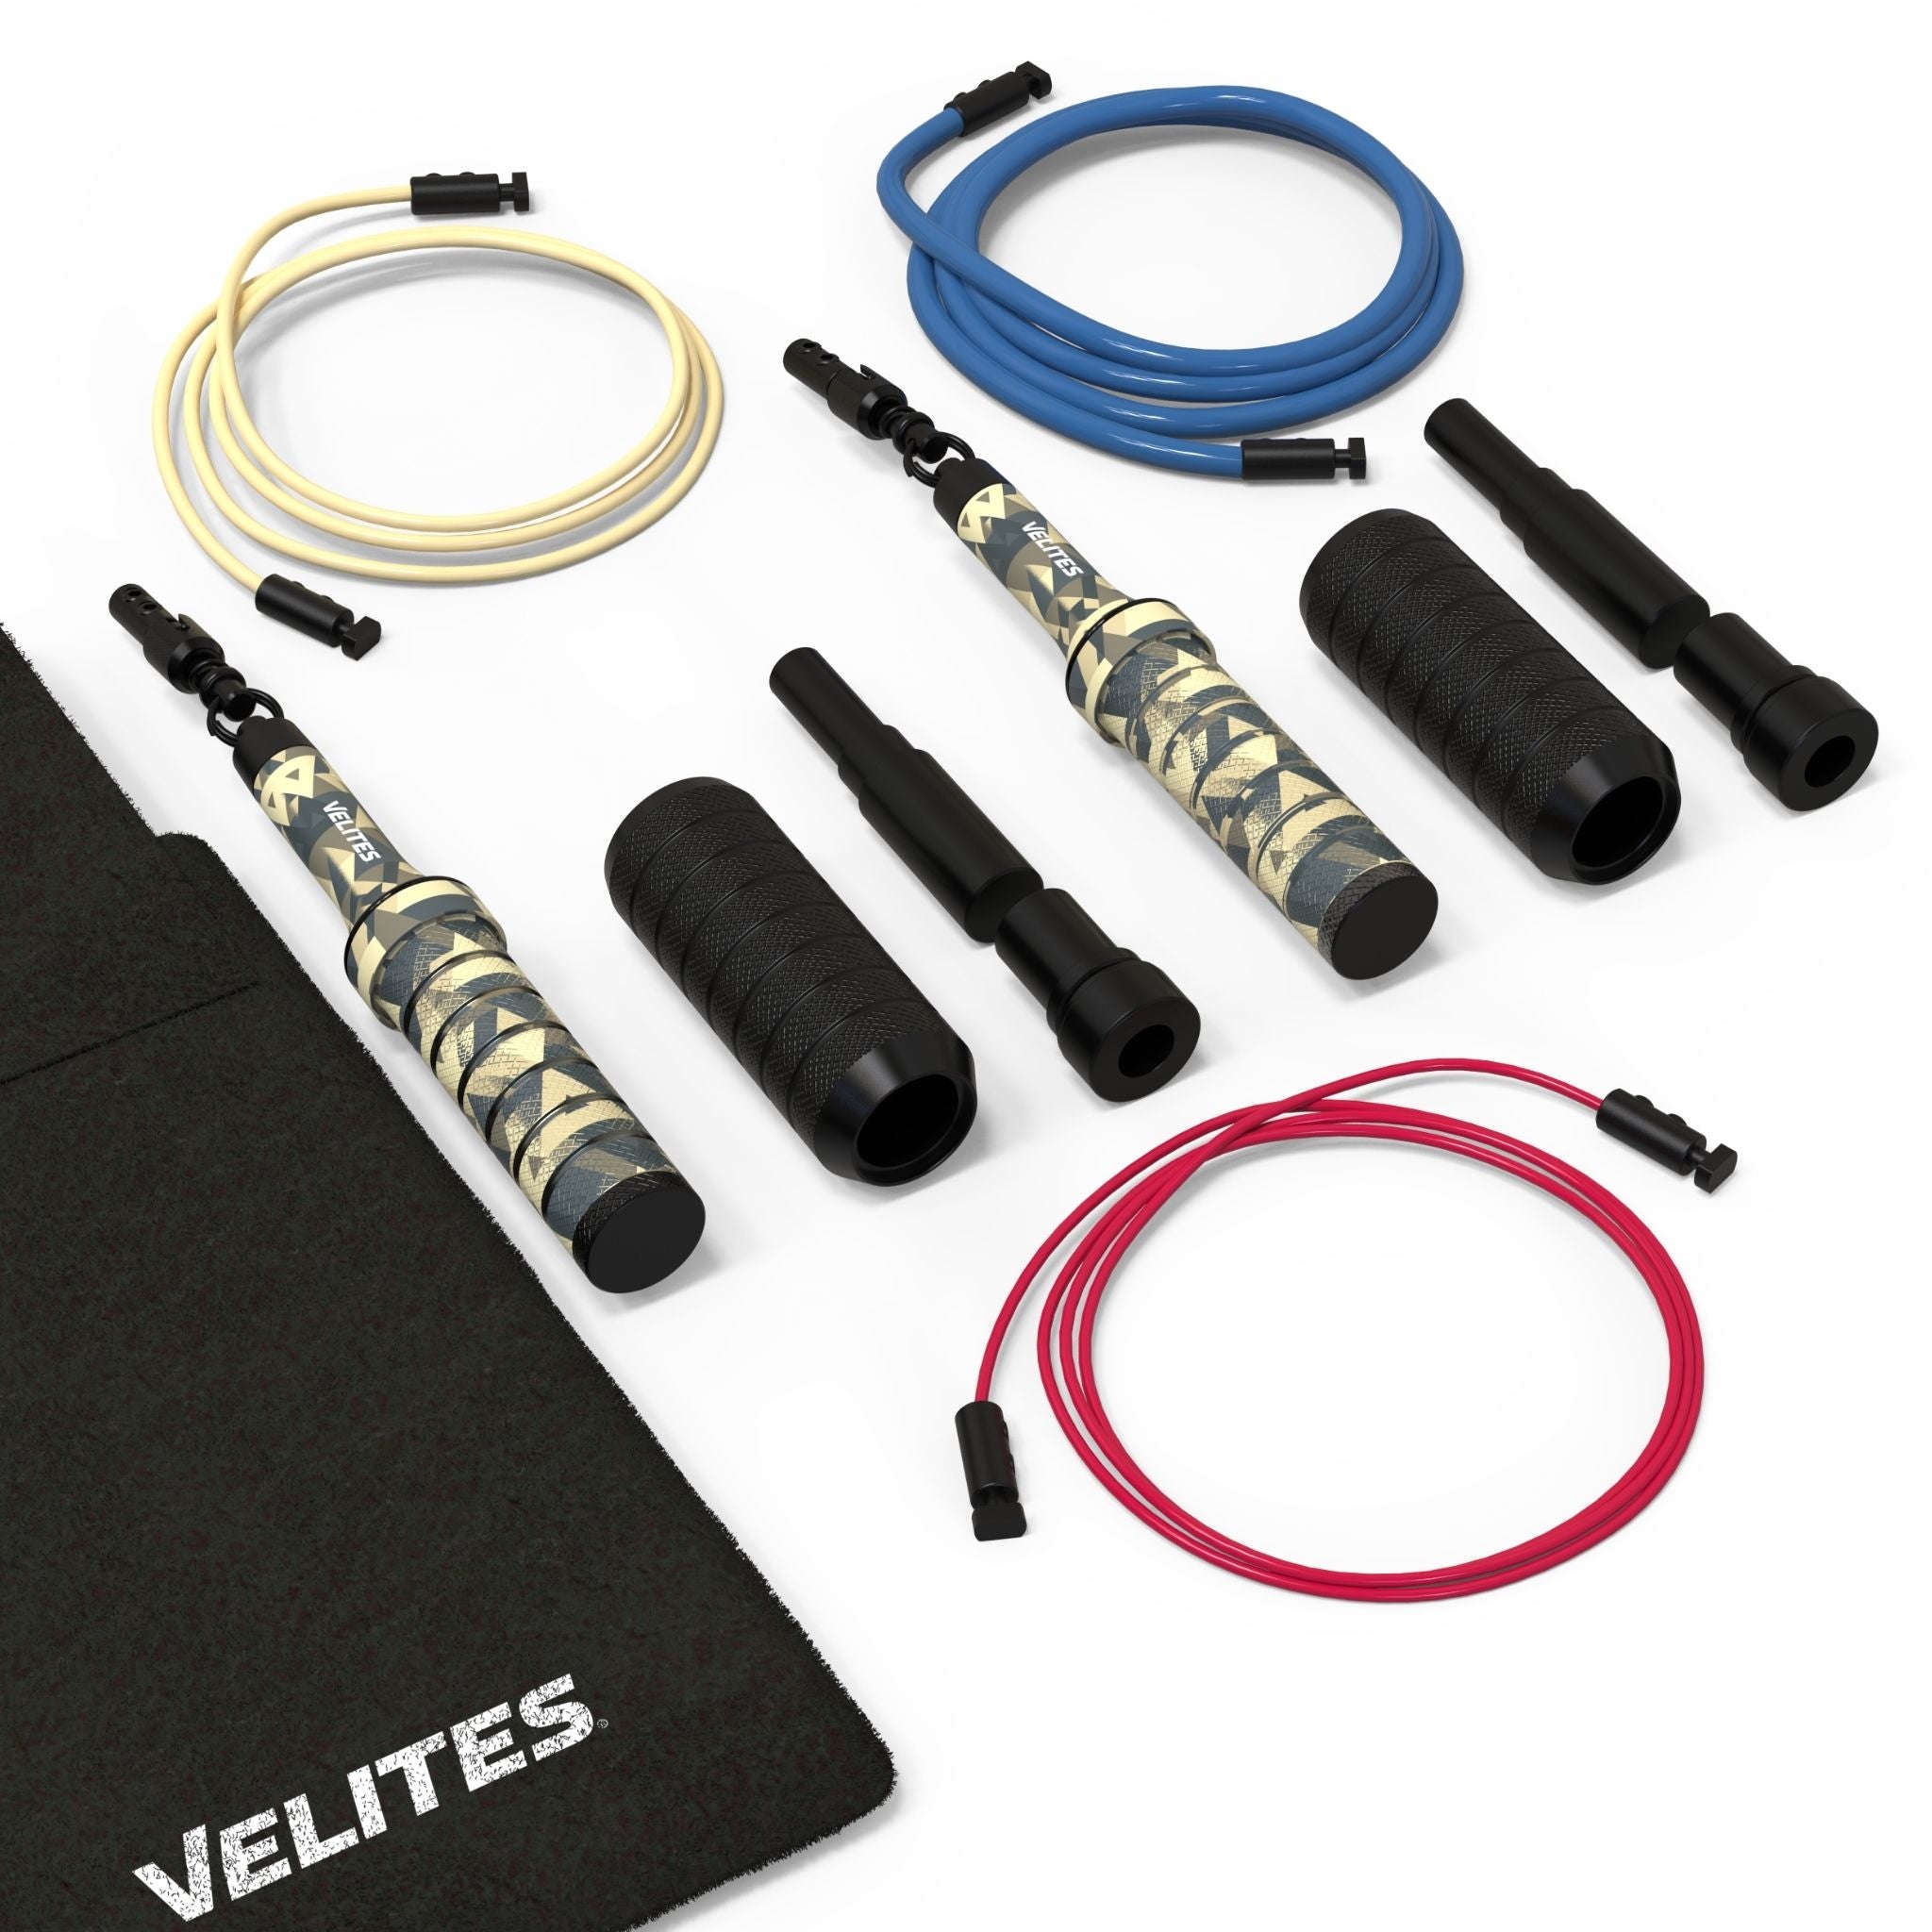 Pack Comba Earth 2.0 Velites + Lastres + Cables - camuflaje - 